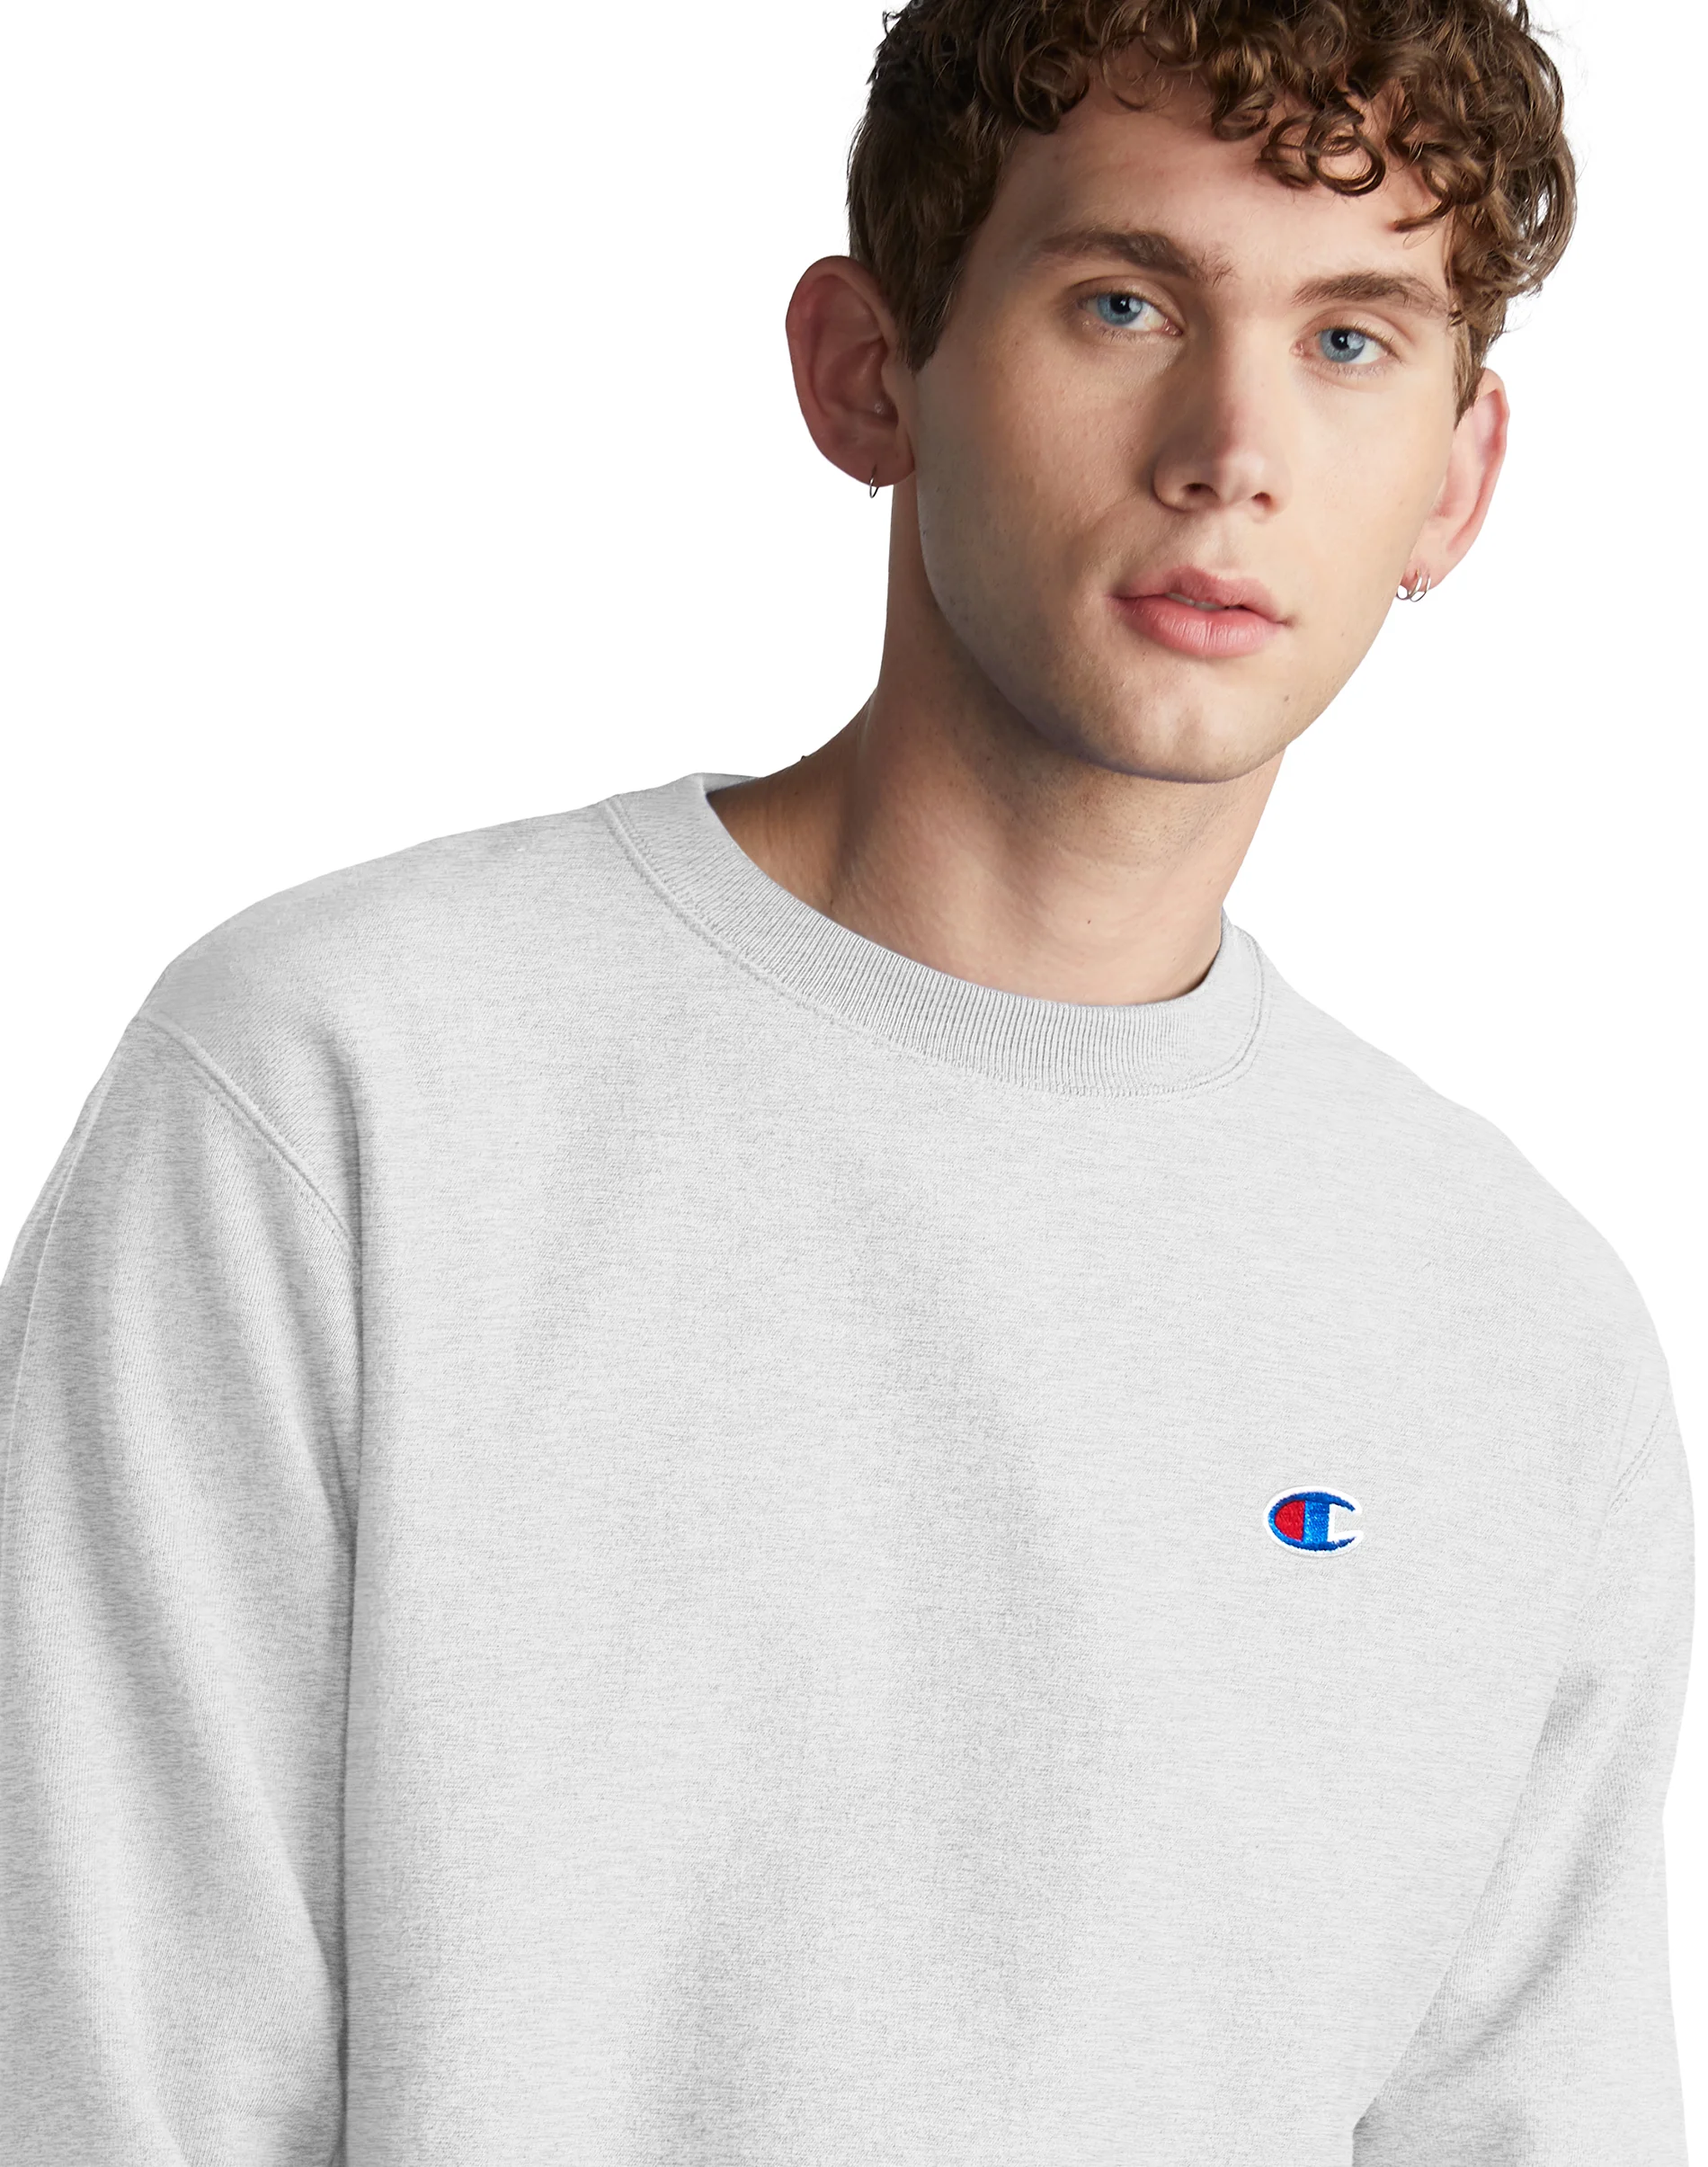 WHITE CHAMPION SWEATSHIRT WITH THE WHEN IT'S GO TIME LOGO